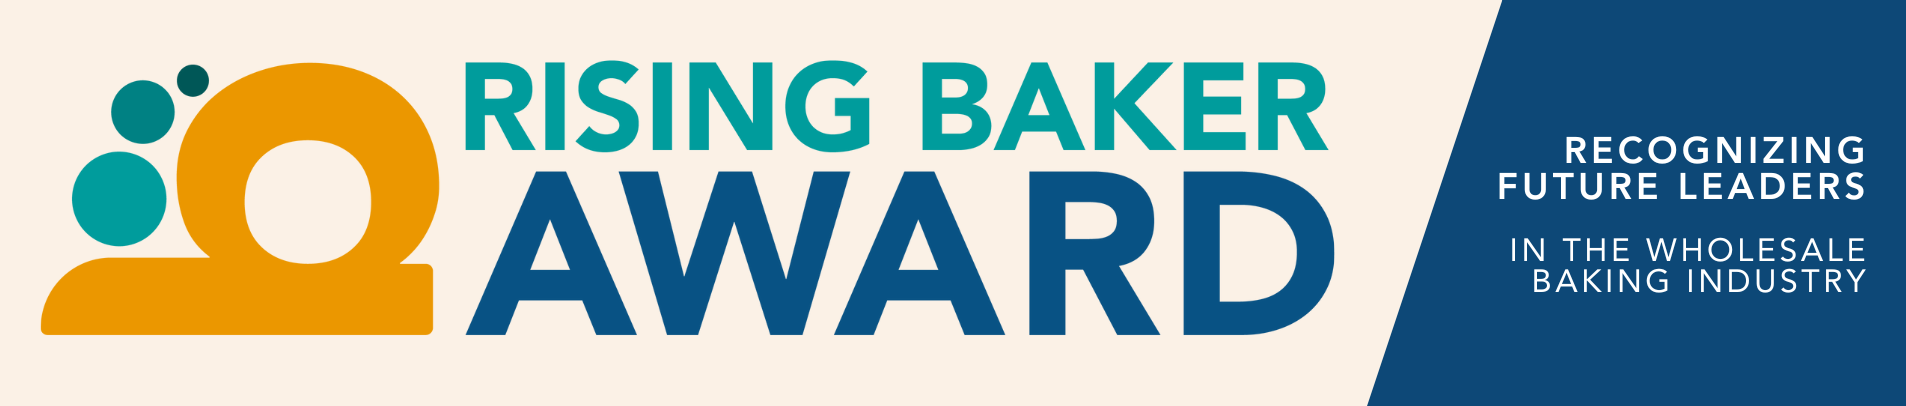 The Rising Baker Award, recognizing future leaders in the wholesale baking industry.